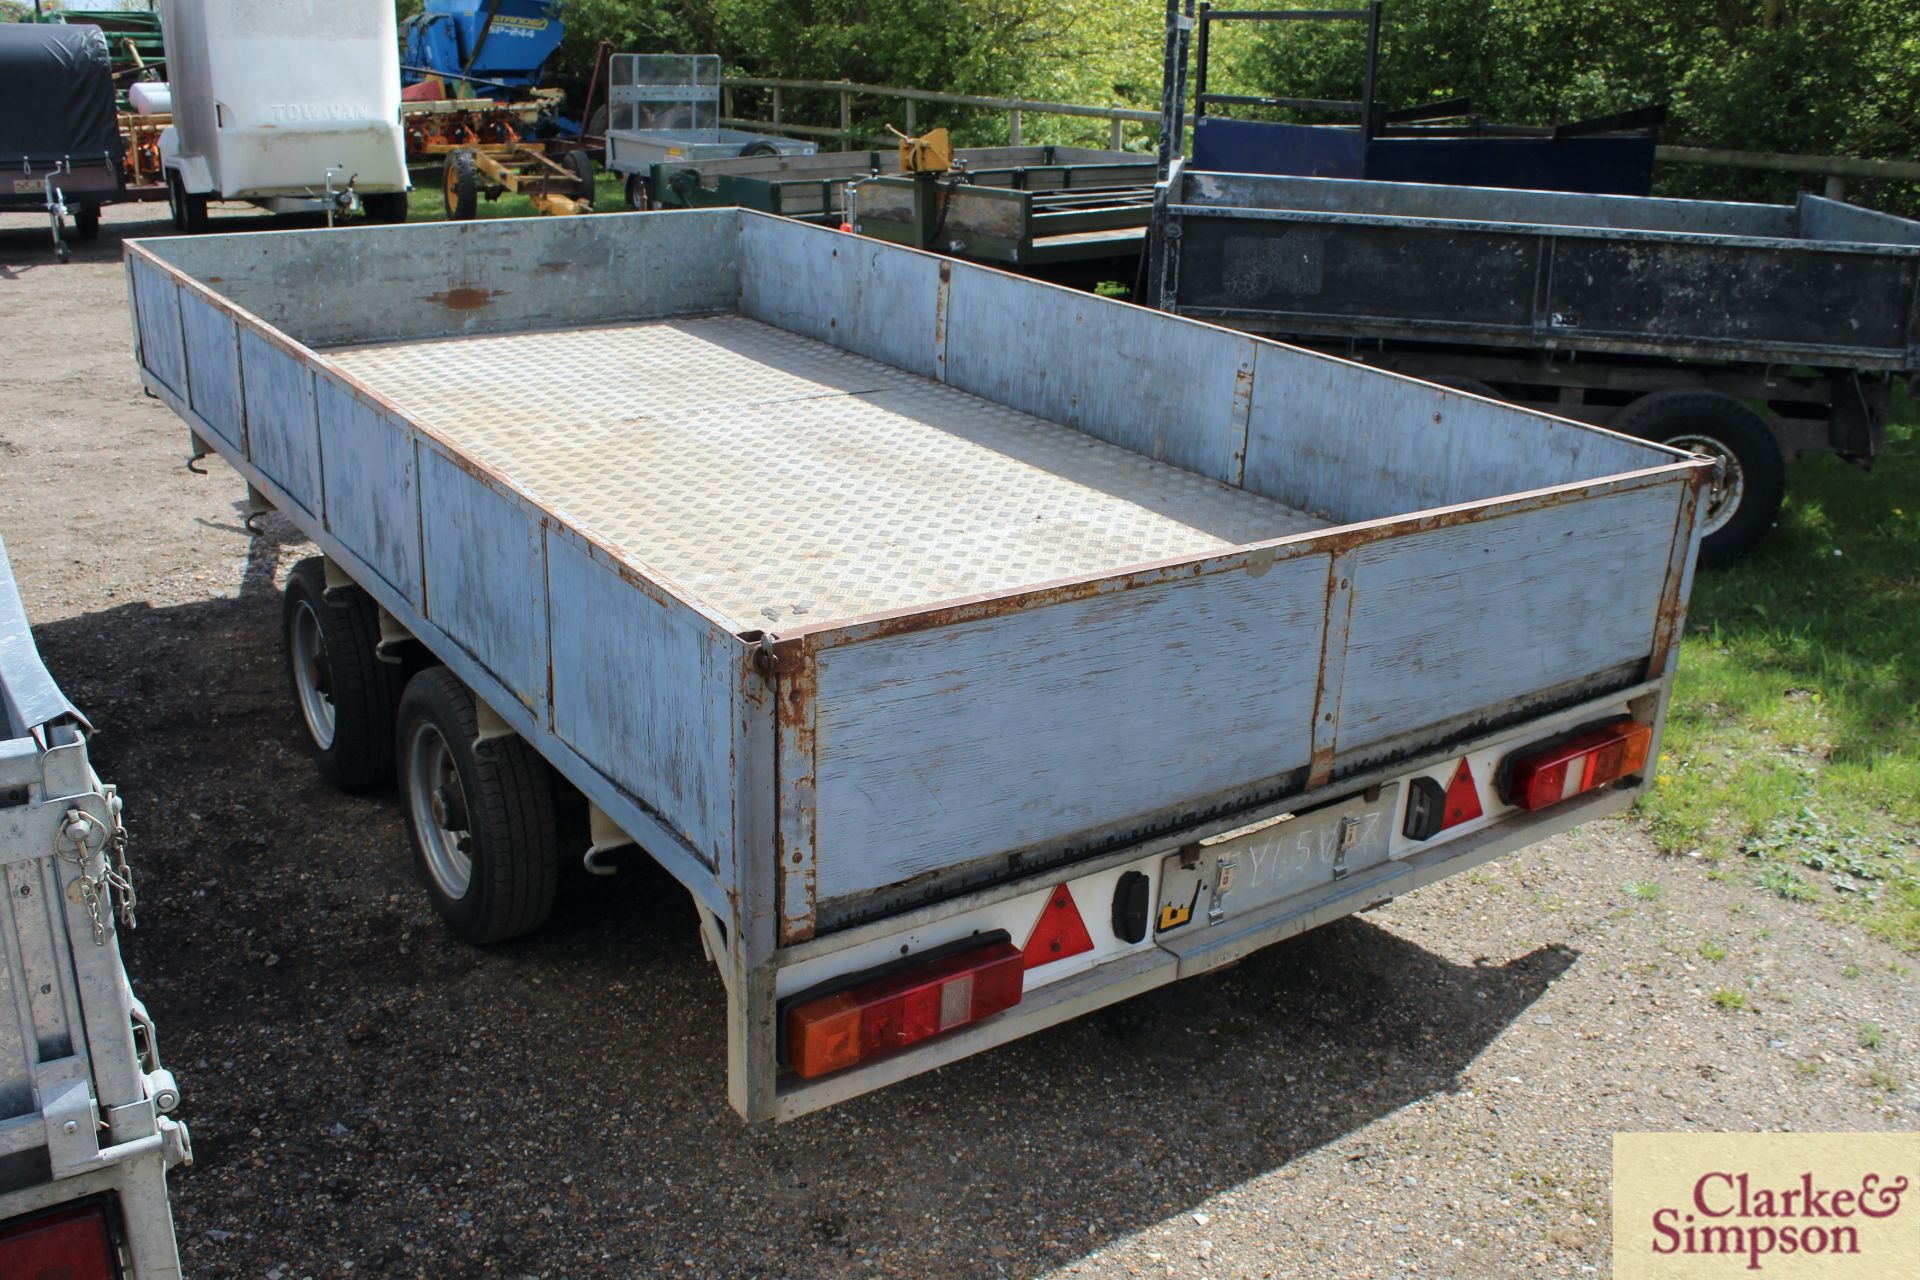 Ifor Williams DP120G 12ft x 6ft6in twin axle trailer. Serial number 68578. With fixed sides and - Image 2 of 8